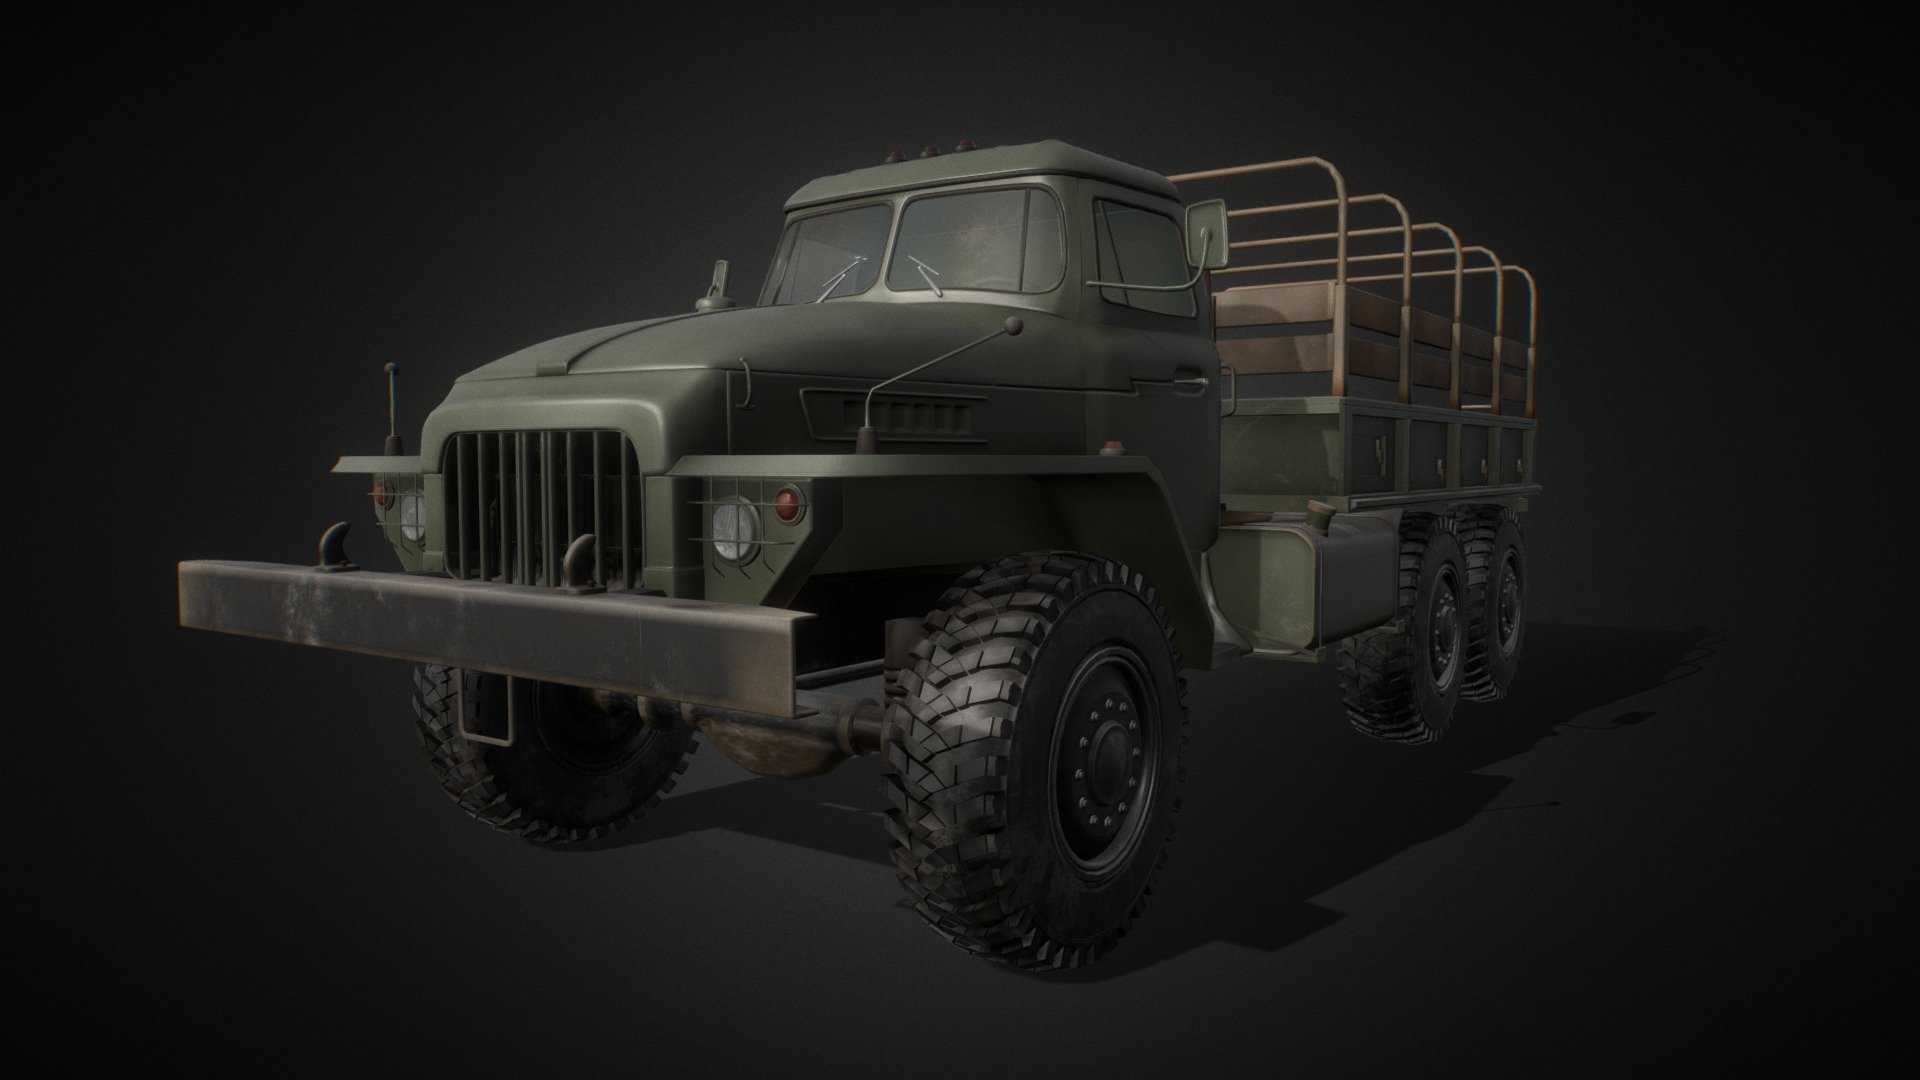 Ural 375d modeled in a Blender 3d . 

Ural 375d  is a Soviet and Russian 6x6 truck from 1961 - 1993

I made the textures in quixel mixer. Tested it in unreal engine 5

has : - 4k Texture (PBR)  

12 materials
5 kinds of colors
UVs
doesn't have : 

doesnt have rig
doesnt have engine
doesnt tachometer
110 000 Vertices (210 000 polygons) ! 

formats: -blend -obj -fbx -dae - Soviet truck - Ural 375d - Buy Royalty Free 3D model by vojtech.vejtasa 3d model